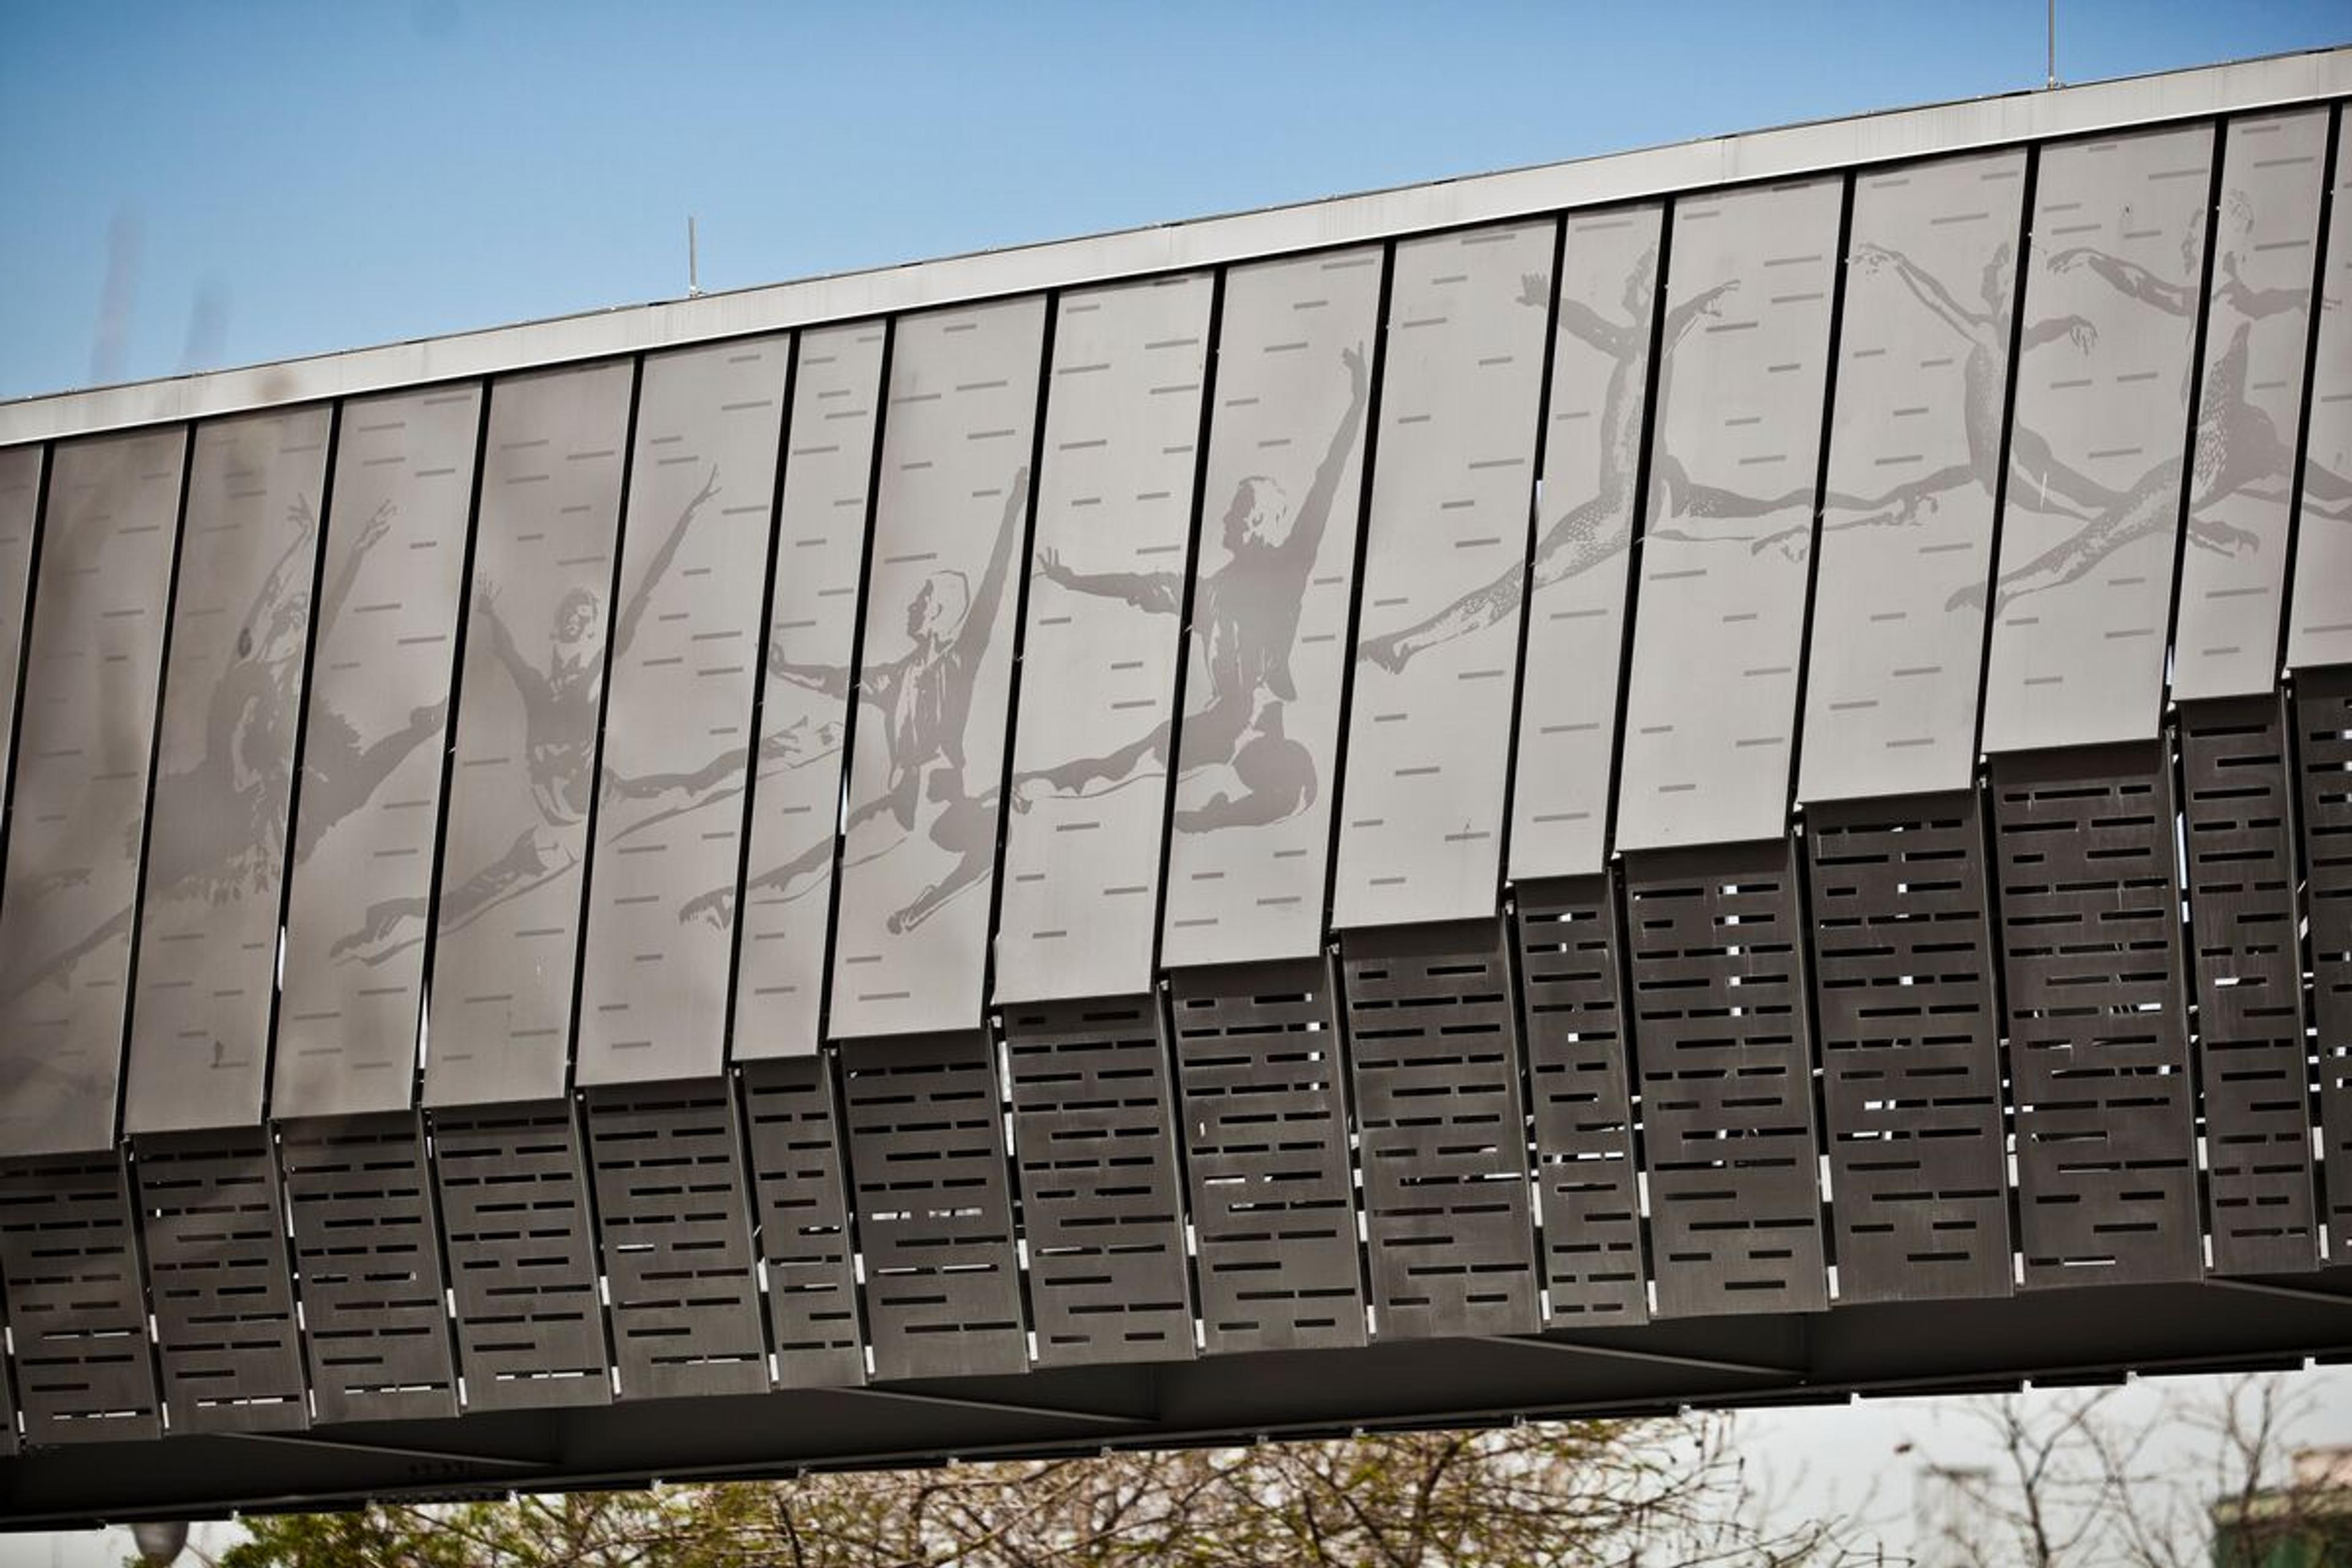 Custom pedestrian bridge in stainless steel • Custom eco-etch patterns bring the design to life • Downtown Houston, Texas